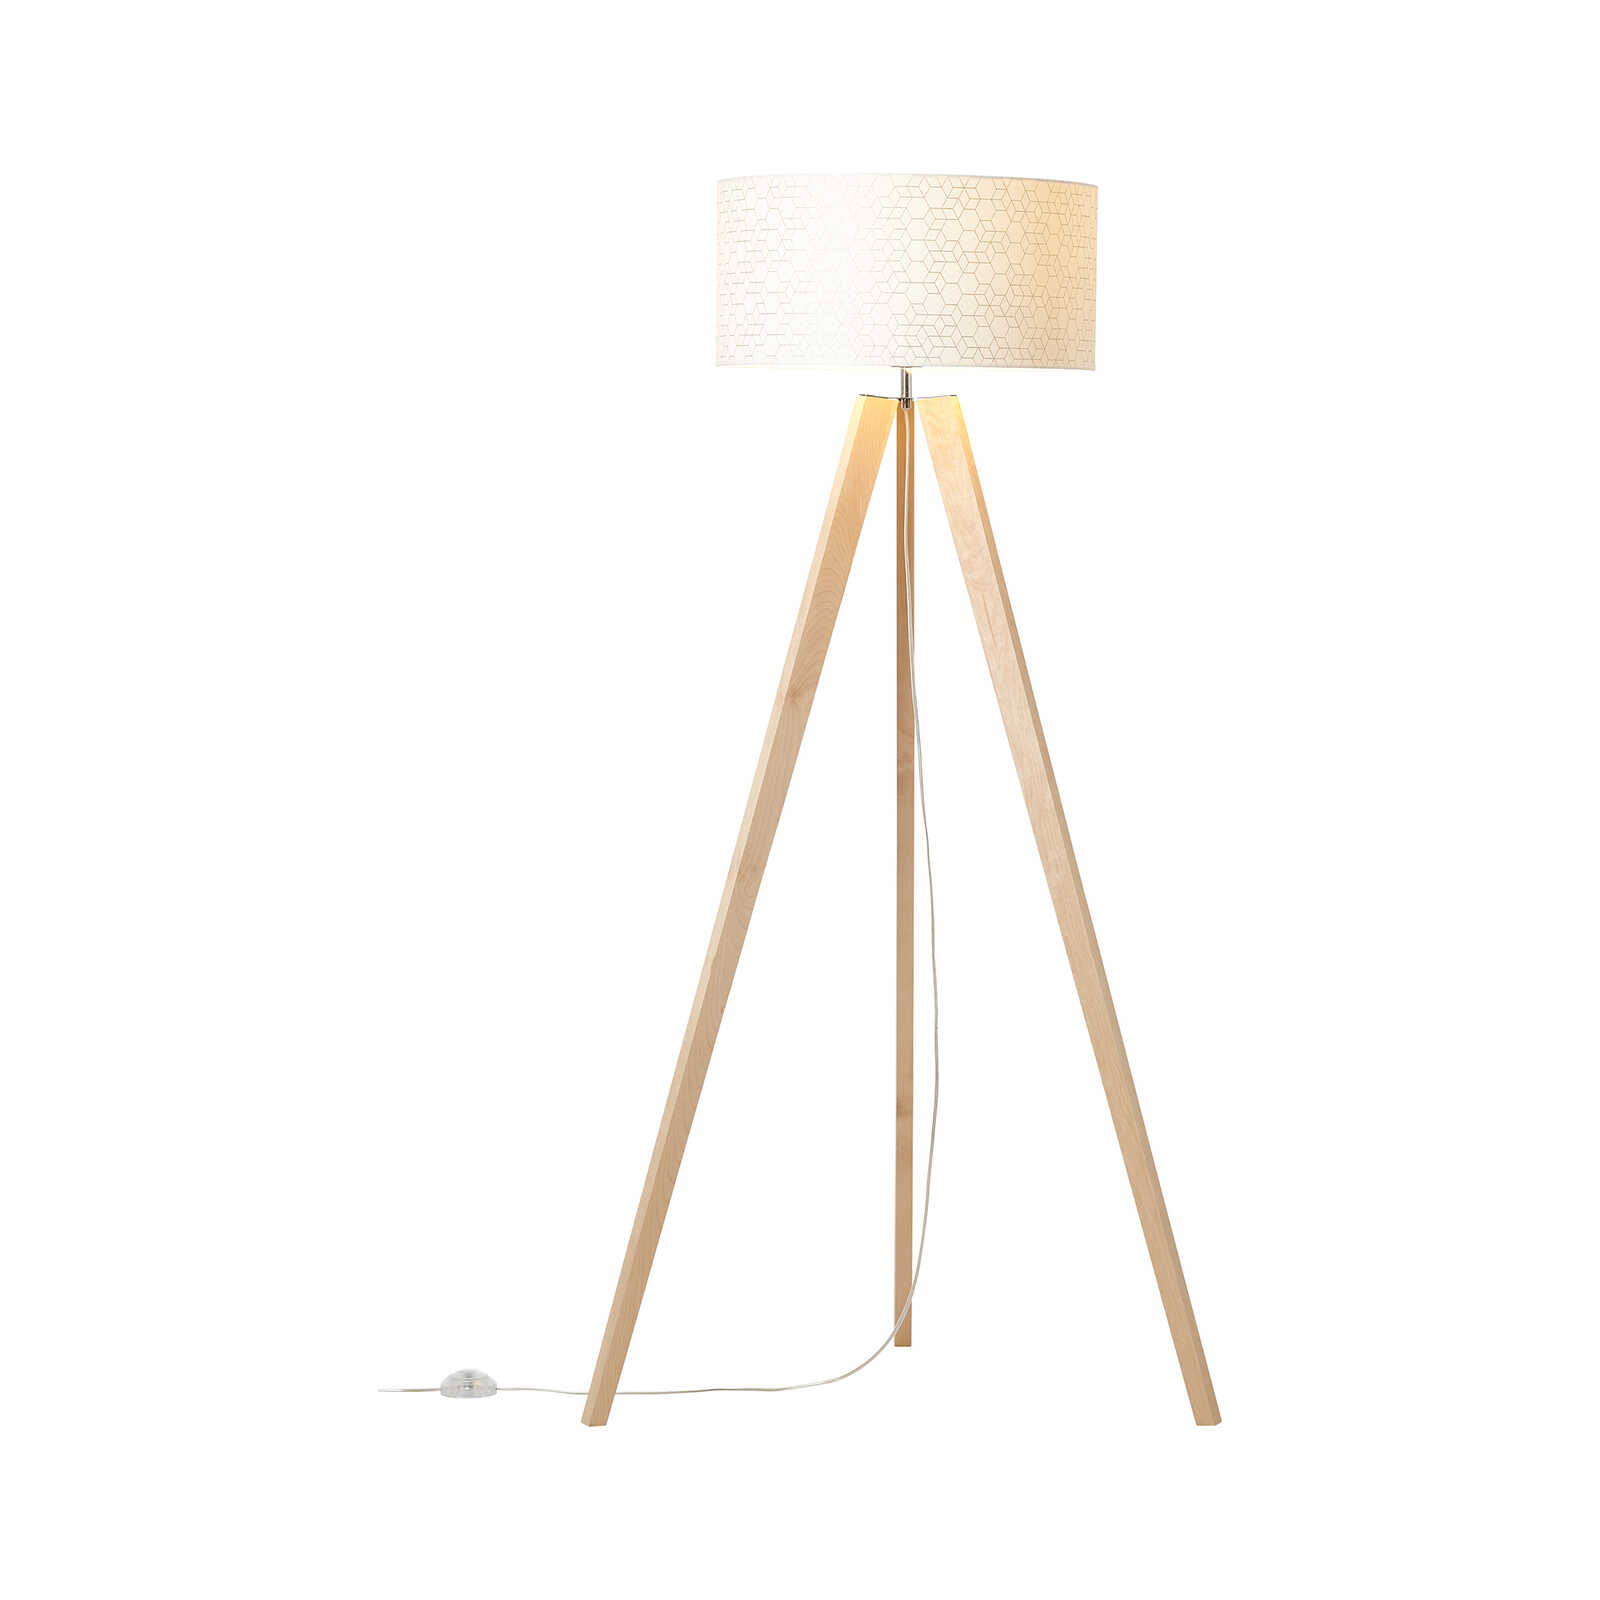 Floor lamp made of textile - Hannes 11 - Brown
